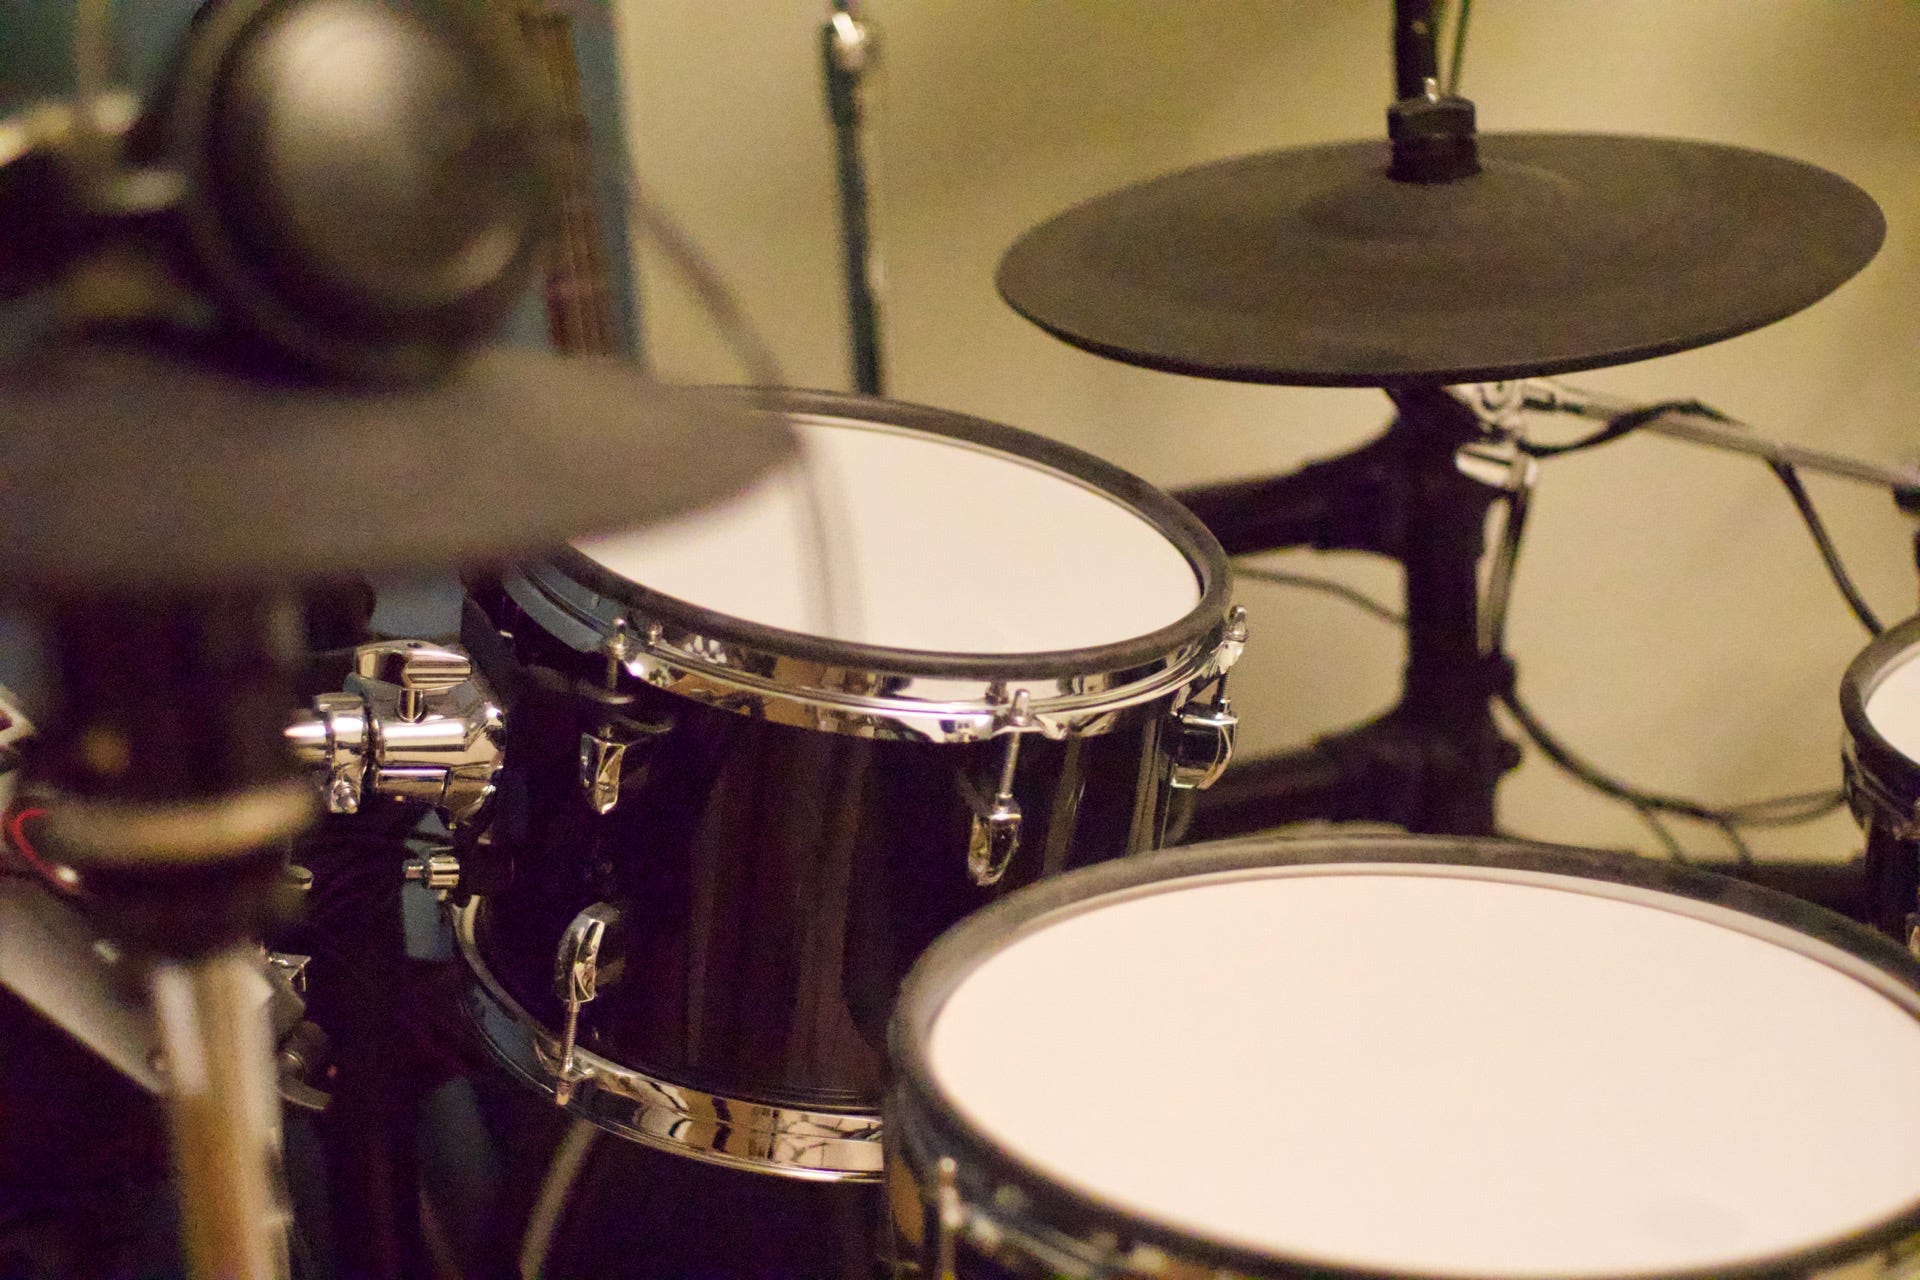 Electronic drums vs acoustic drums — What's right for you?